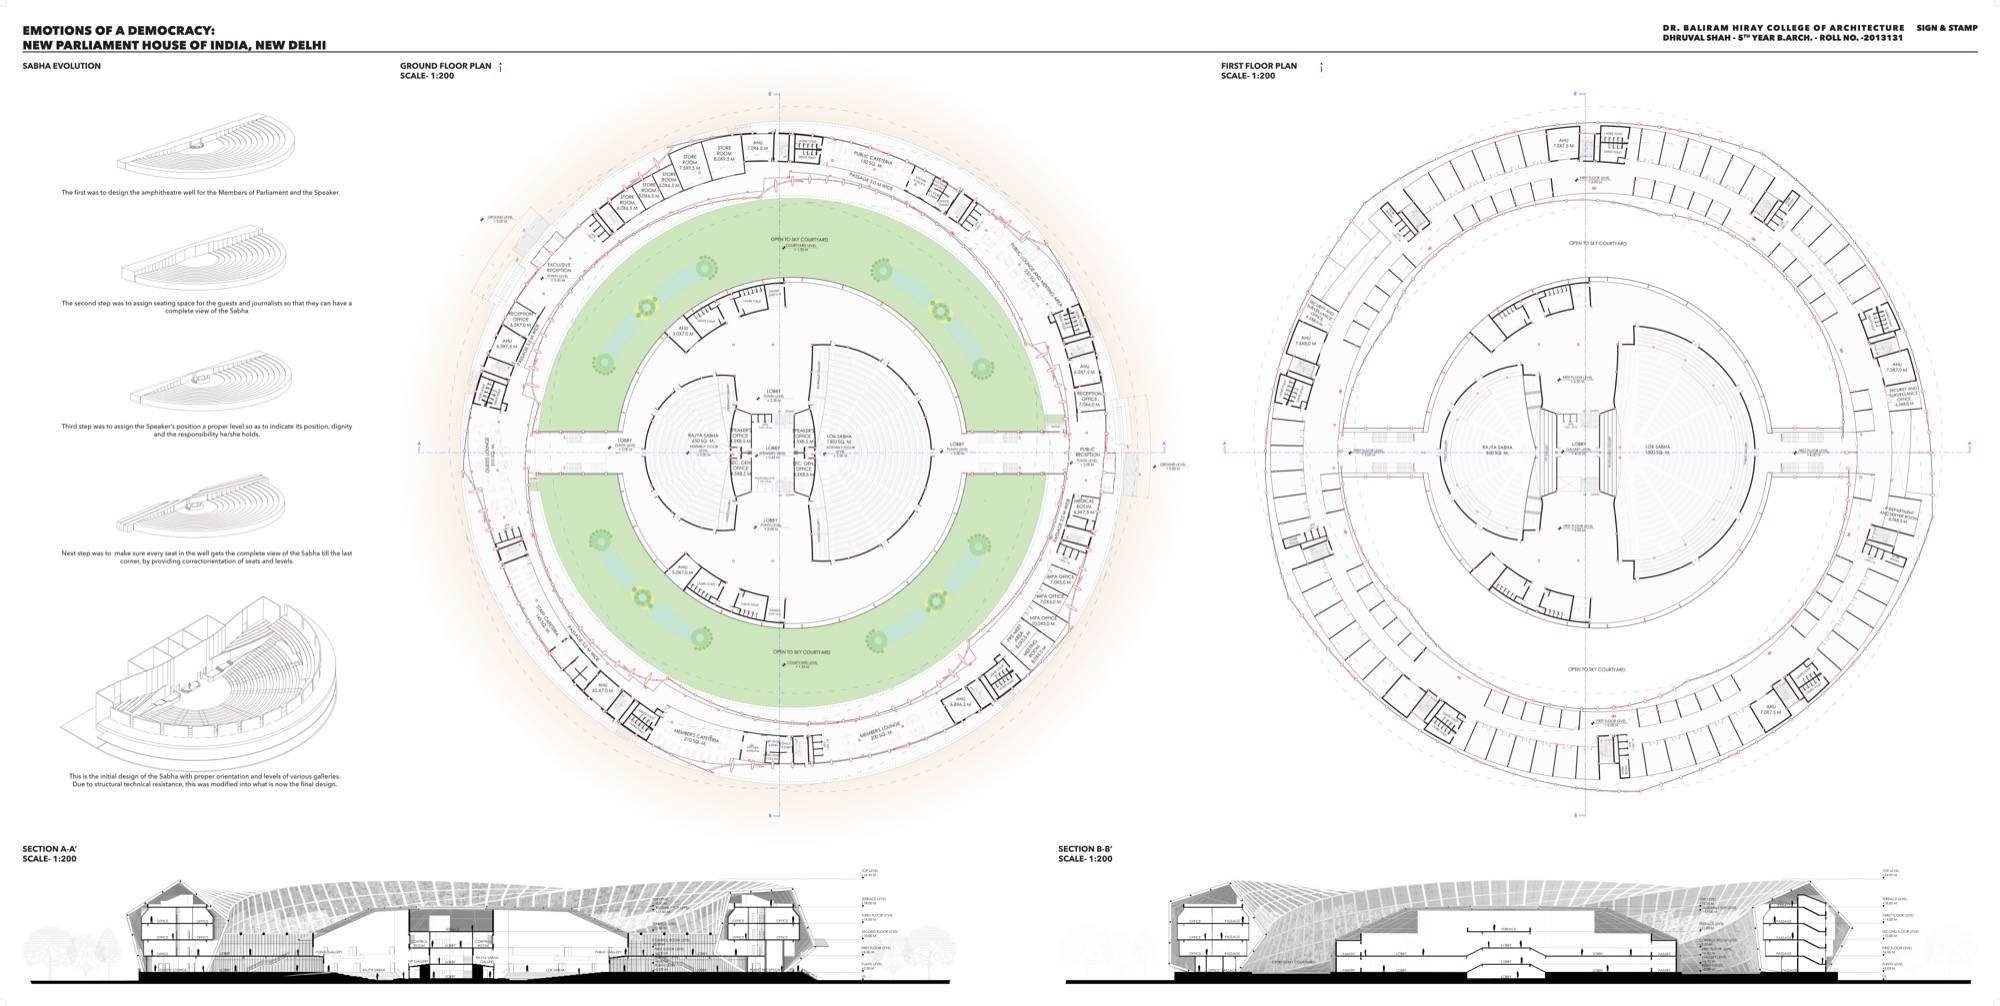 B.Arch Thesis: Emotions of a Democracy: New Parliament House of India, New Delhi Dhruval Shah 18